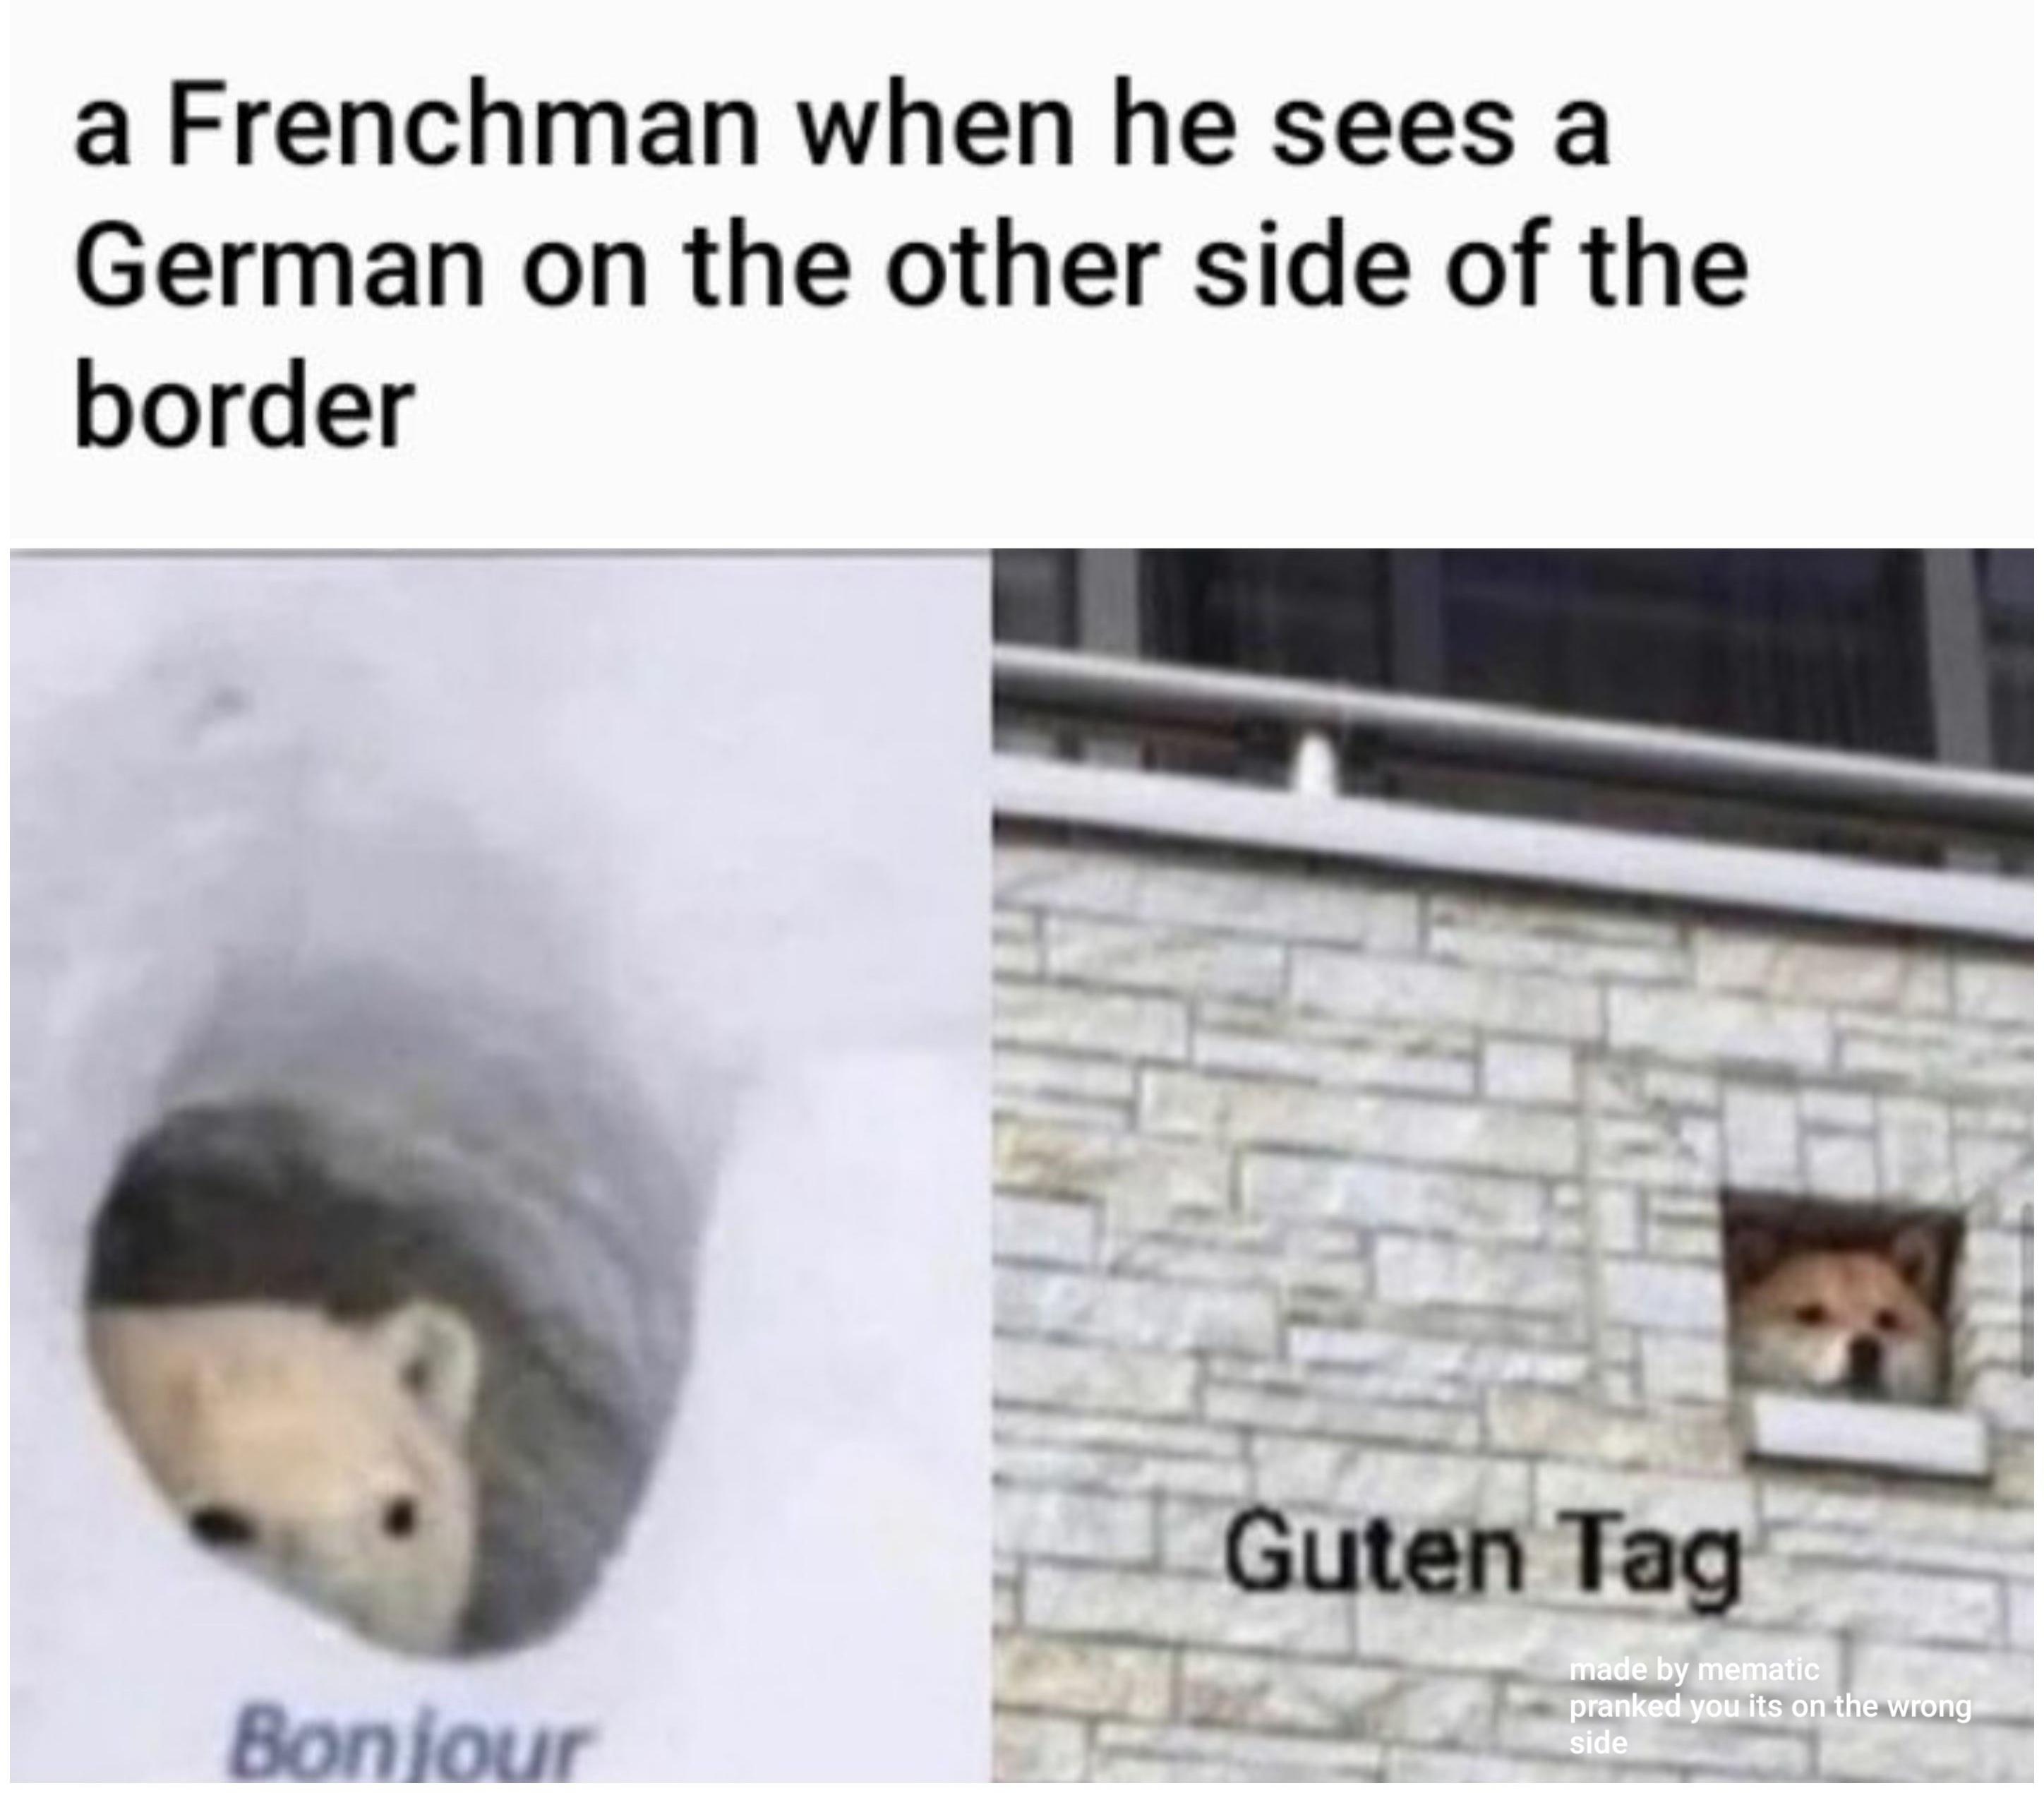 dank memes - guten tag dog - a Frenchman when he sees a German on the other side of the border Guten Tag Bonjour made by mematic pranked you its on the wrong side